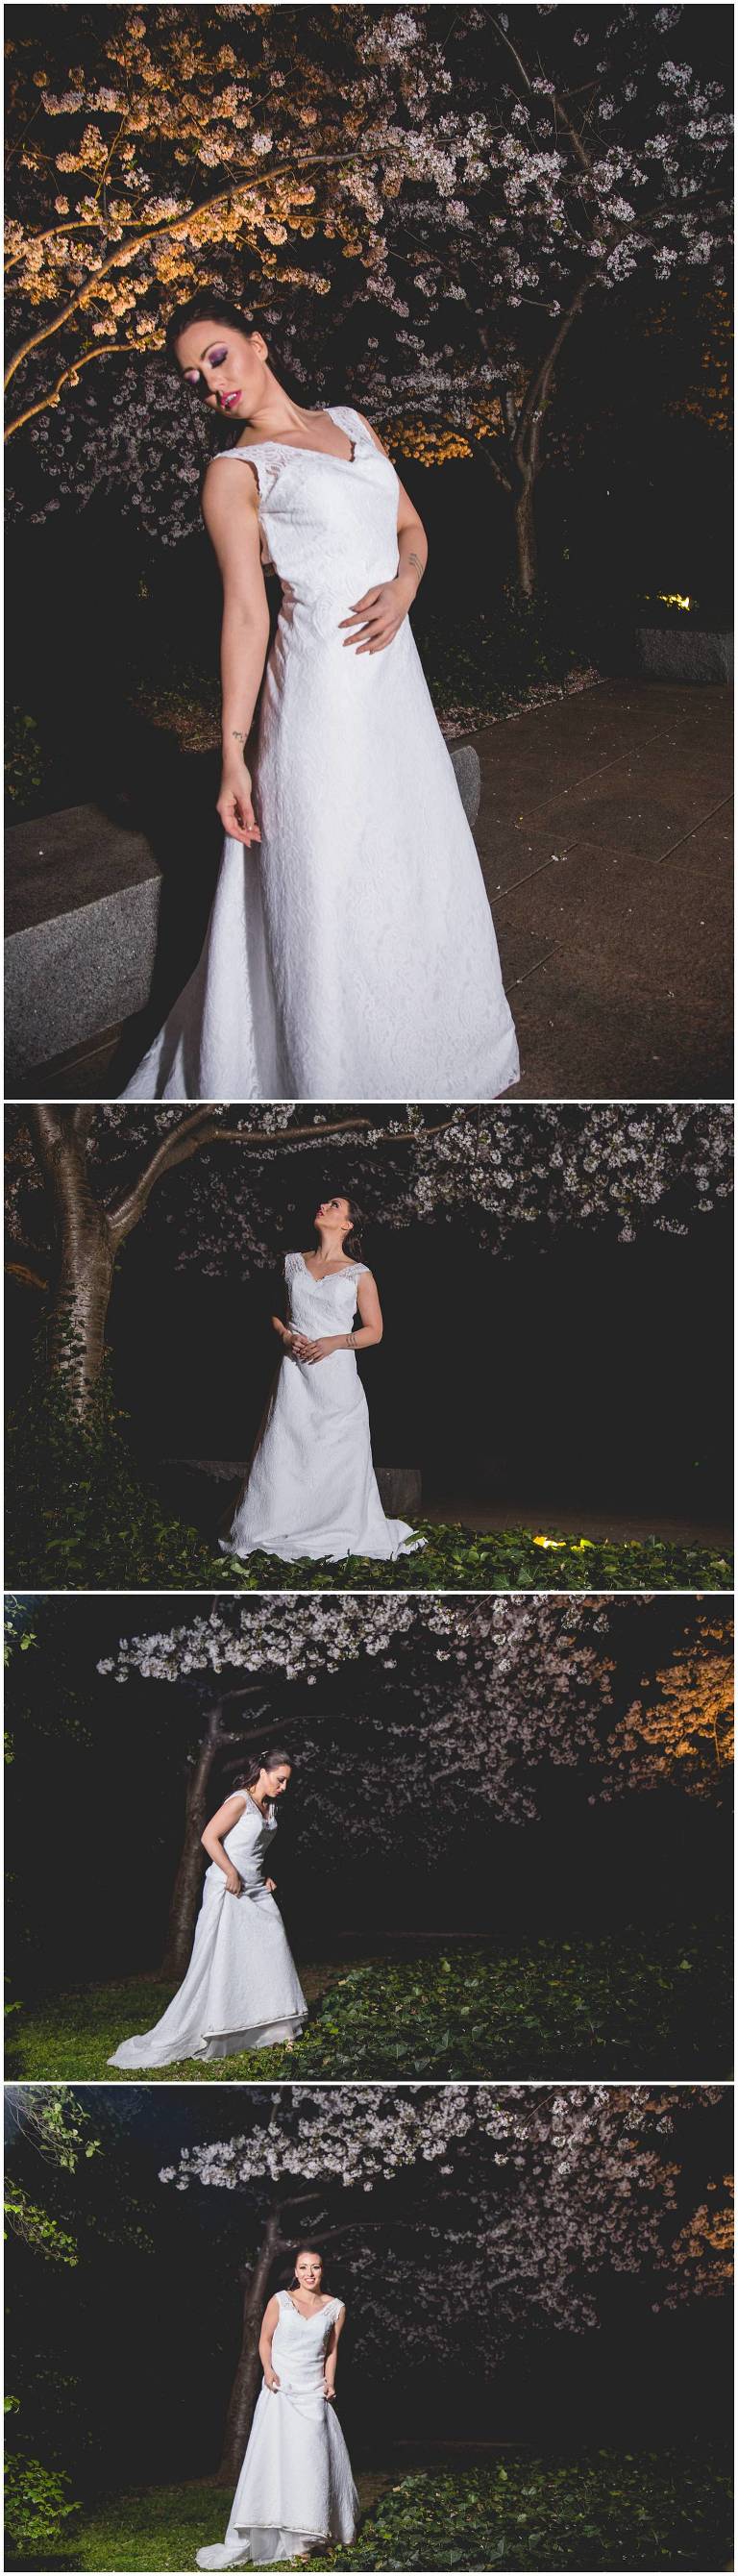 RoneyfieldPhotography_RebeccaRuss_SyledBridalShoot_DC_0016